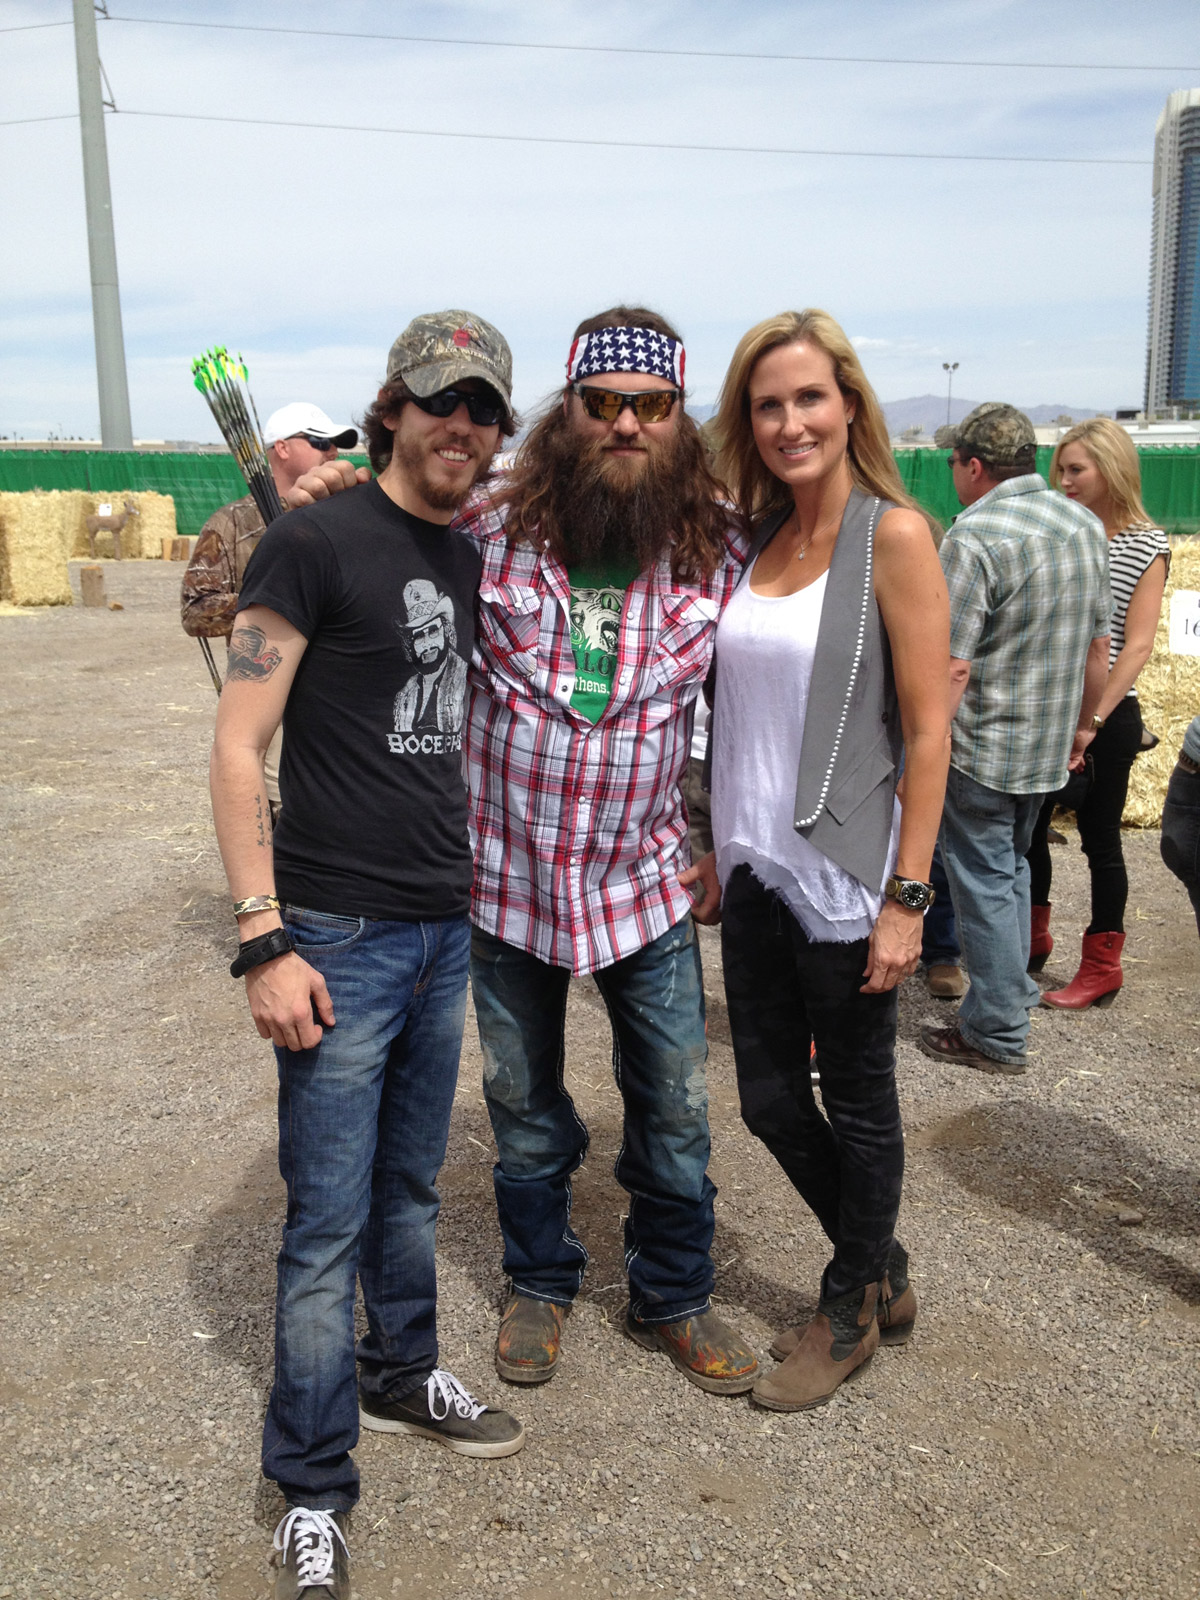 Chris Janson takes on Willie Robertson in Archery